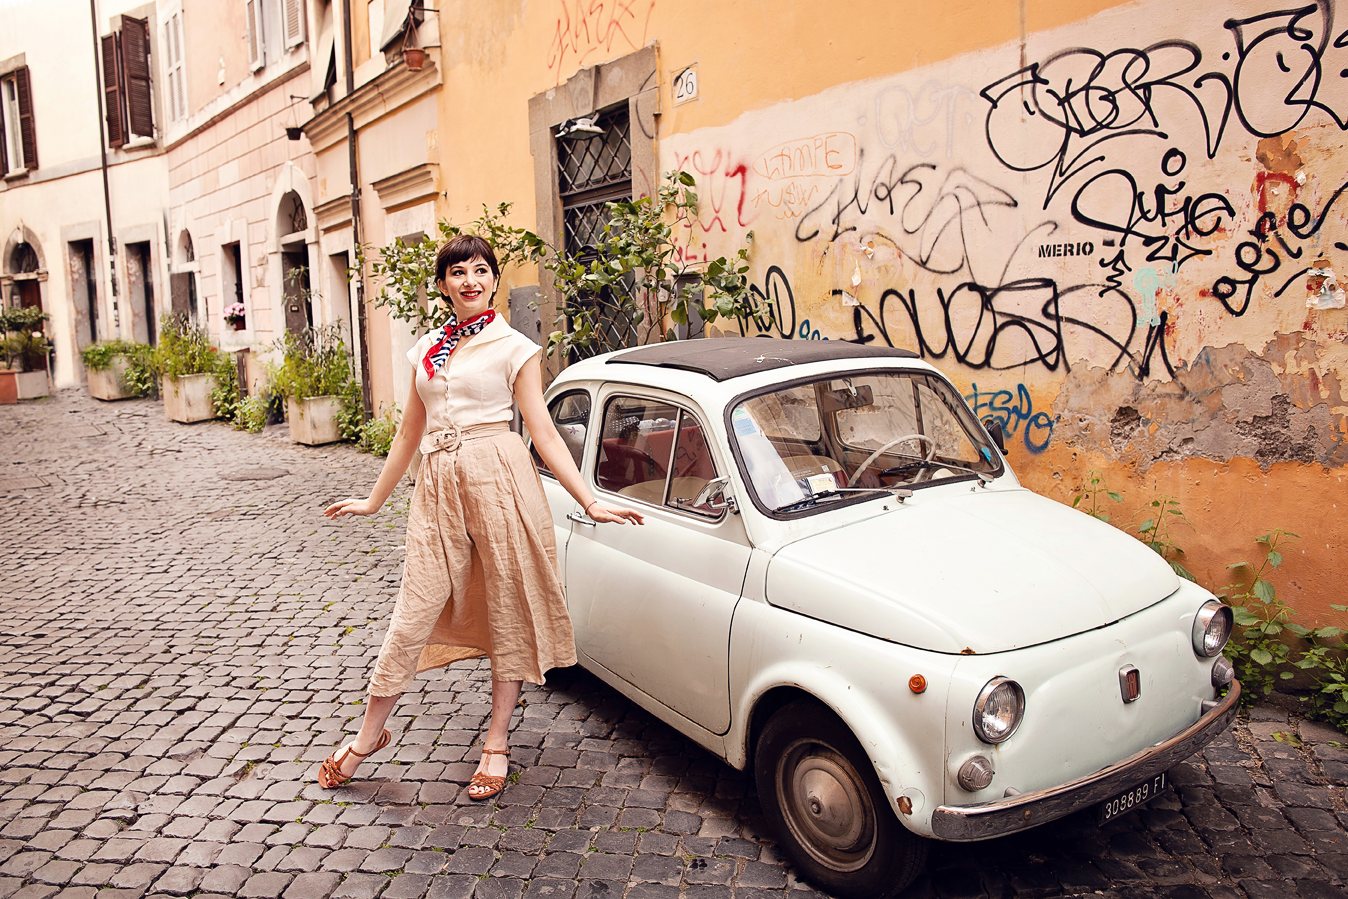 Honeymoon, vacation, family, engagement, maternity, love story individual and solo photoshoots in Rome, Italy by photographer Tricia Anne Photography | Rome Photographer, vacation, tripadvisor, instagram, fun, married, love, story, photography, session, photoshoot, wedding photographer, vacation photographer, engagement photo, honeymoon photoshoot, rome honeymoon, rome wedding, elopement in Rome, honeymoon photographer rome, Solo Photo shoot, Rome Photography, Photo Shoot Trastevere, Solo trip to Rome, What to do in Rome, Solo traveler, Trastevere, Trastevere photo shoot